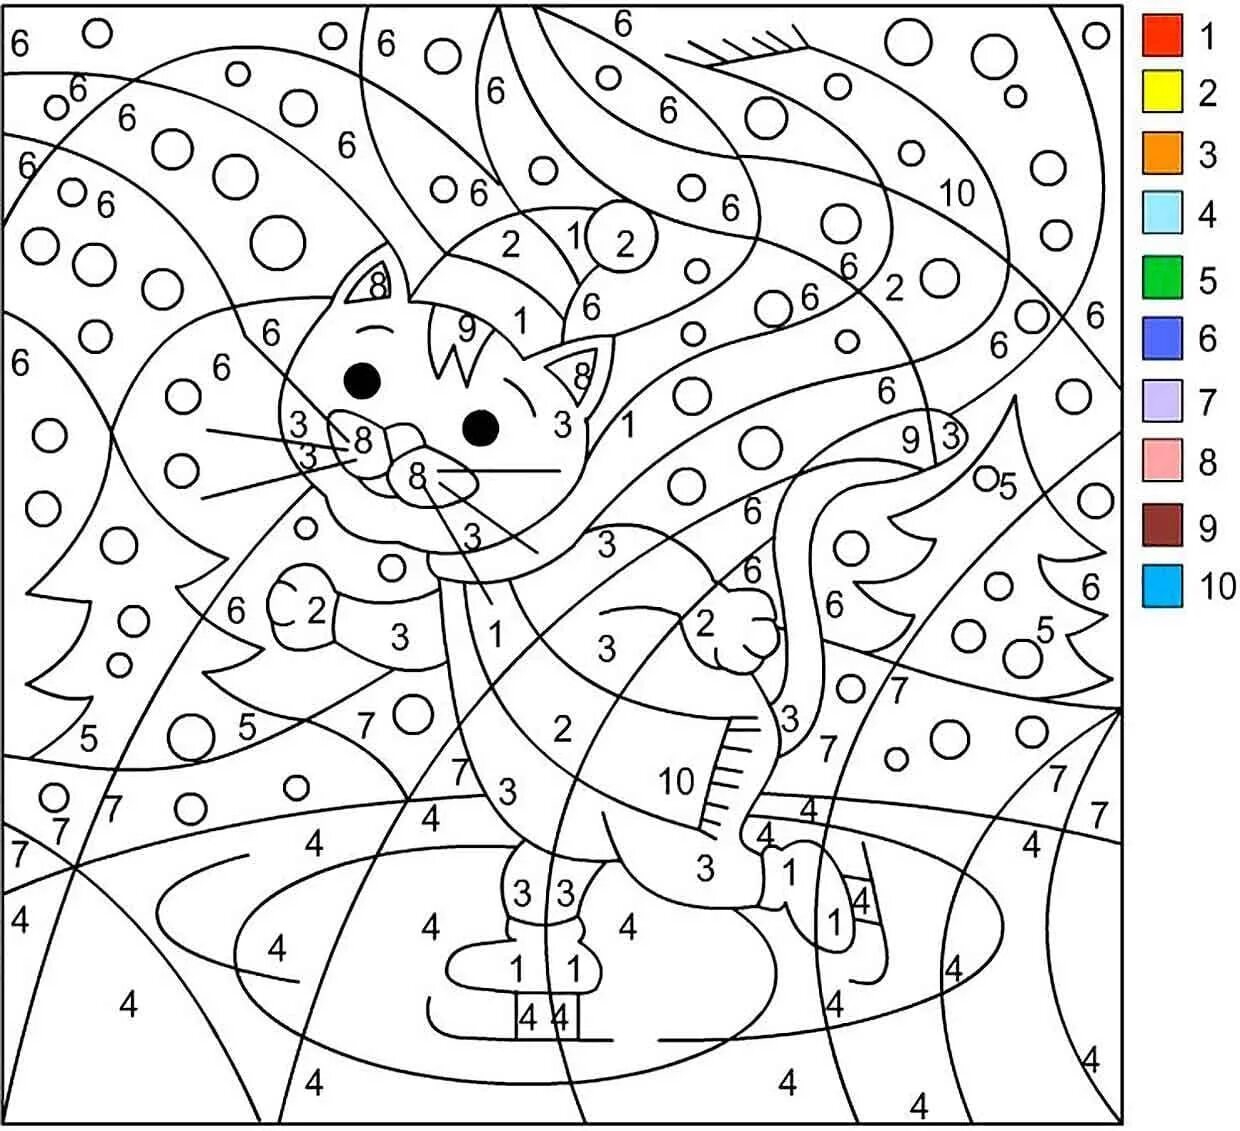 Exotic kitty coloring by numbers